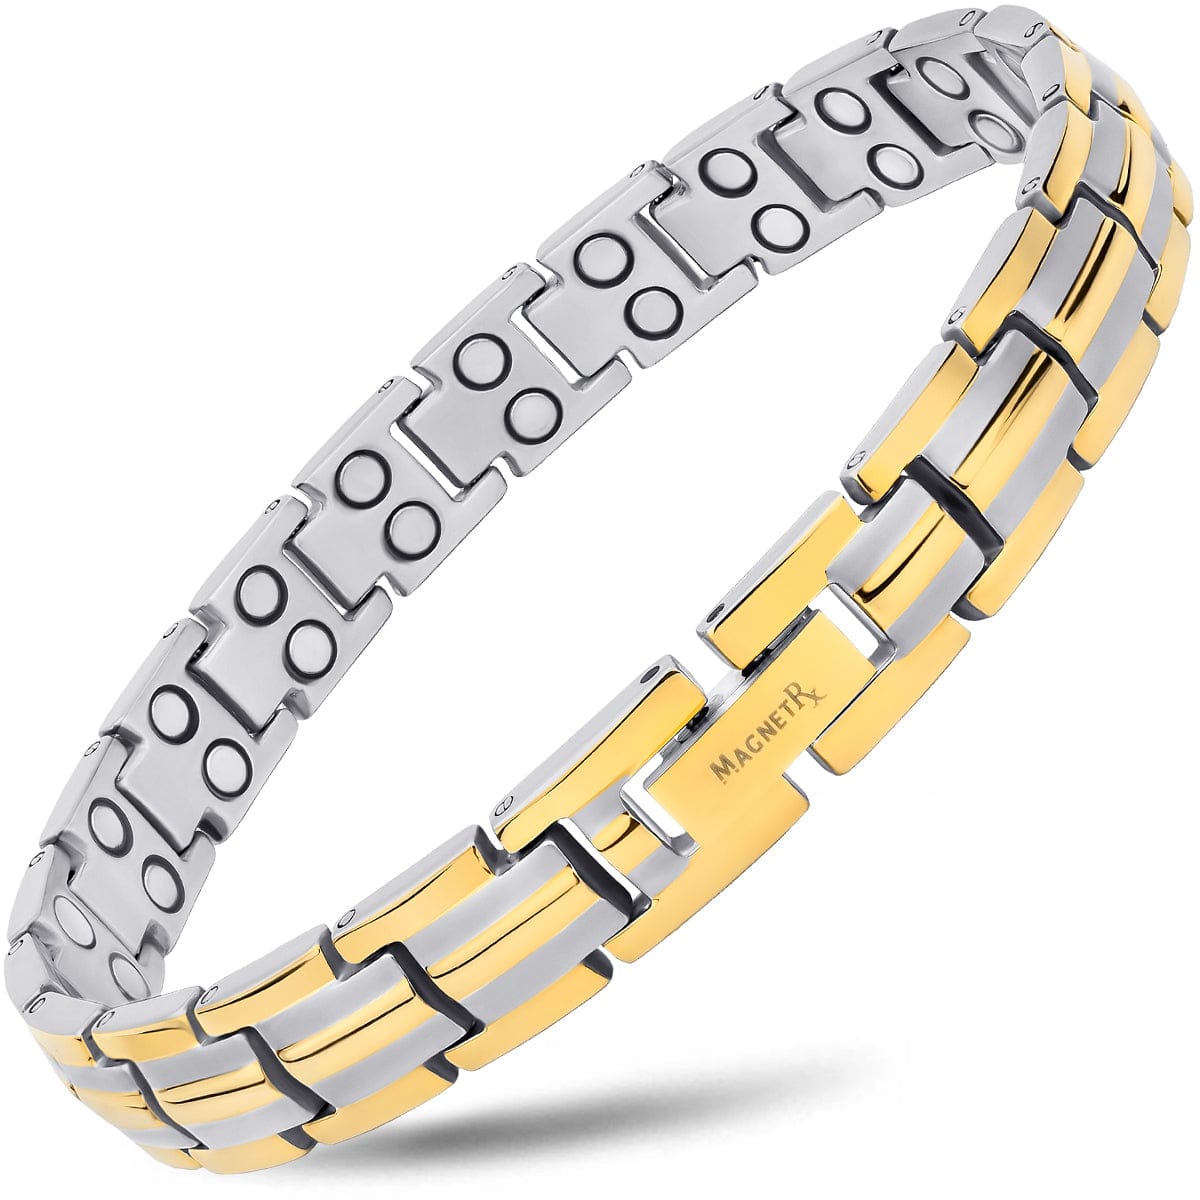 Stainless Steel Rose Gold Titanium Magnetic Therapy Bracelet With Germanium  Energy For Men And Women Black Hand Chain Health Braceslet From Suecy,  $11.08 | DHgate.Com